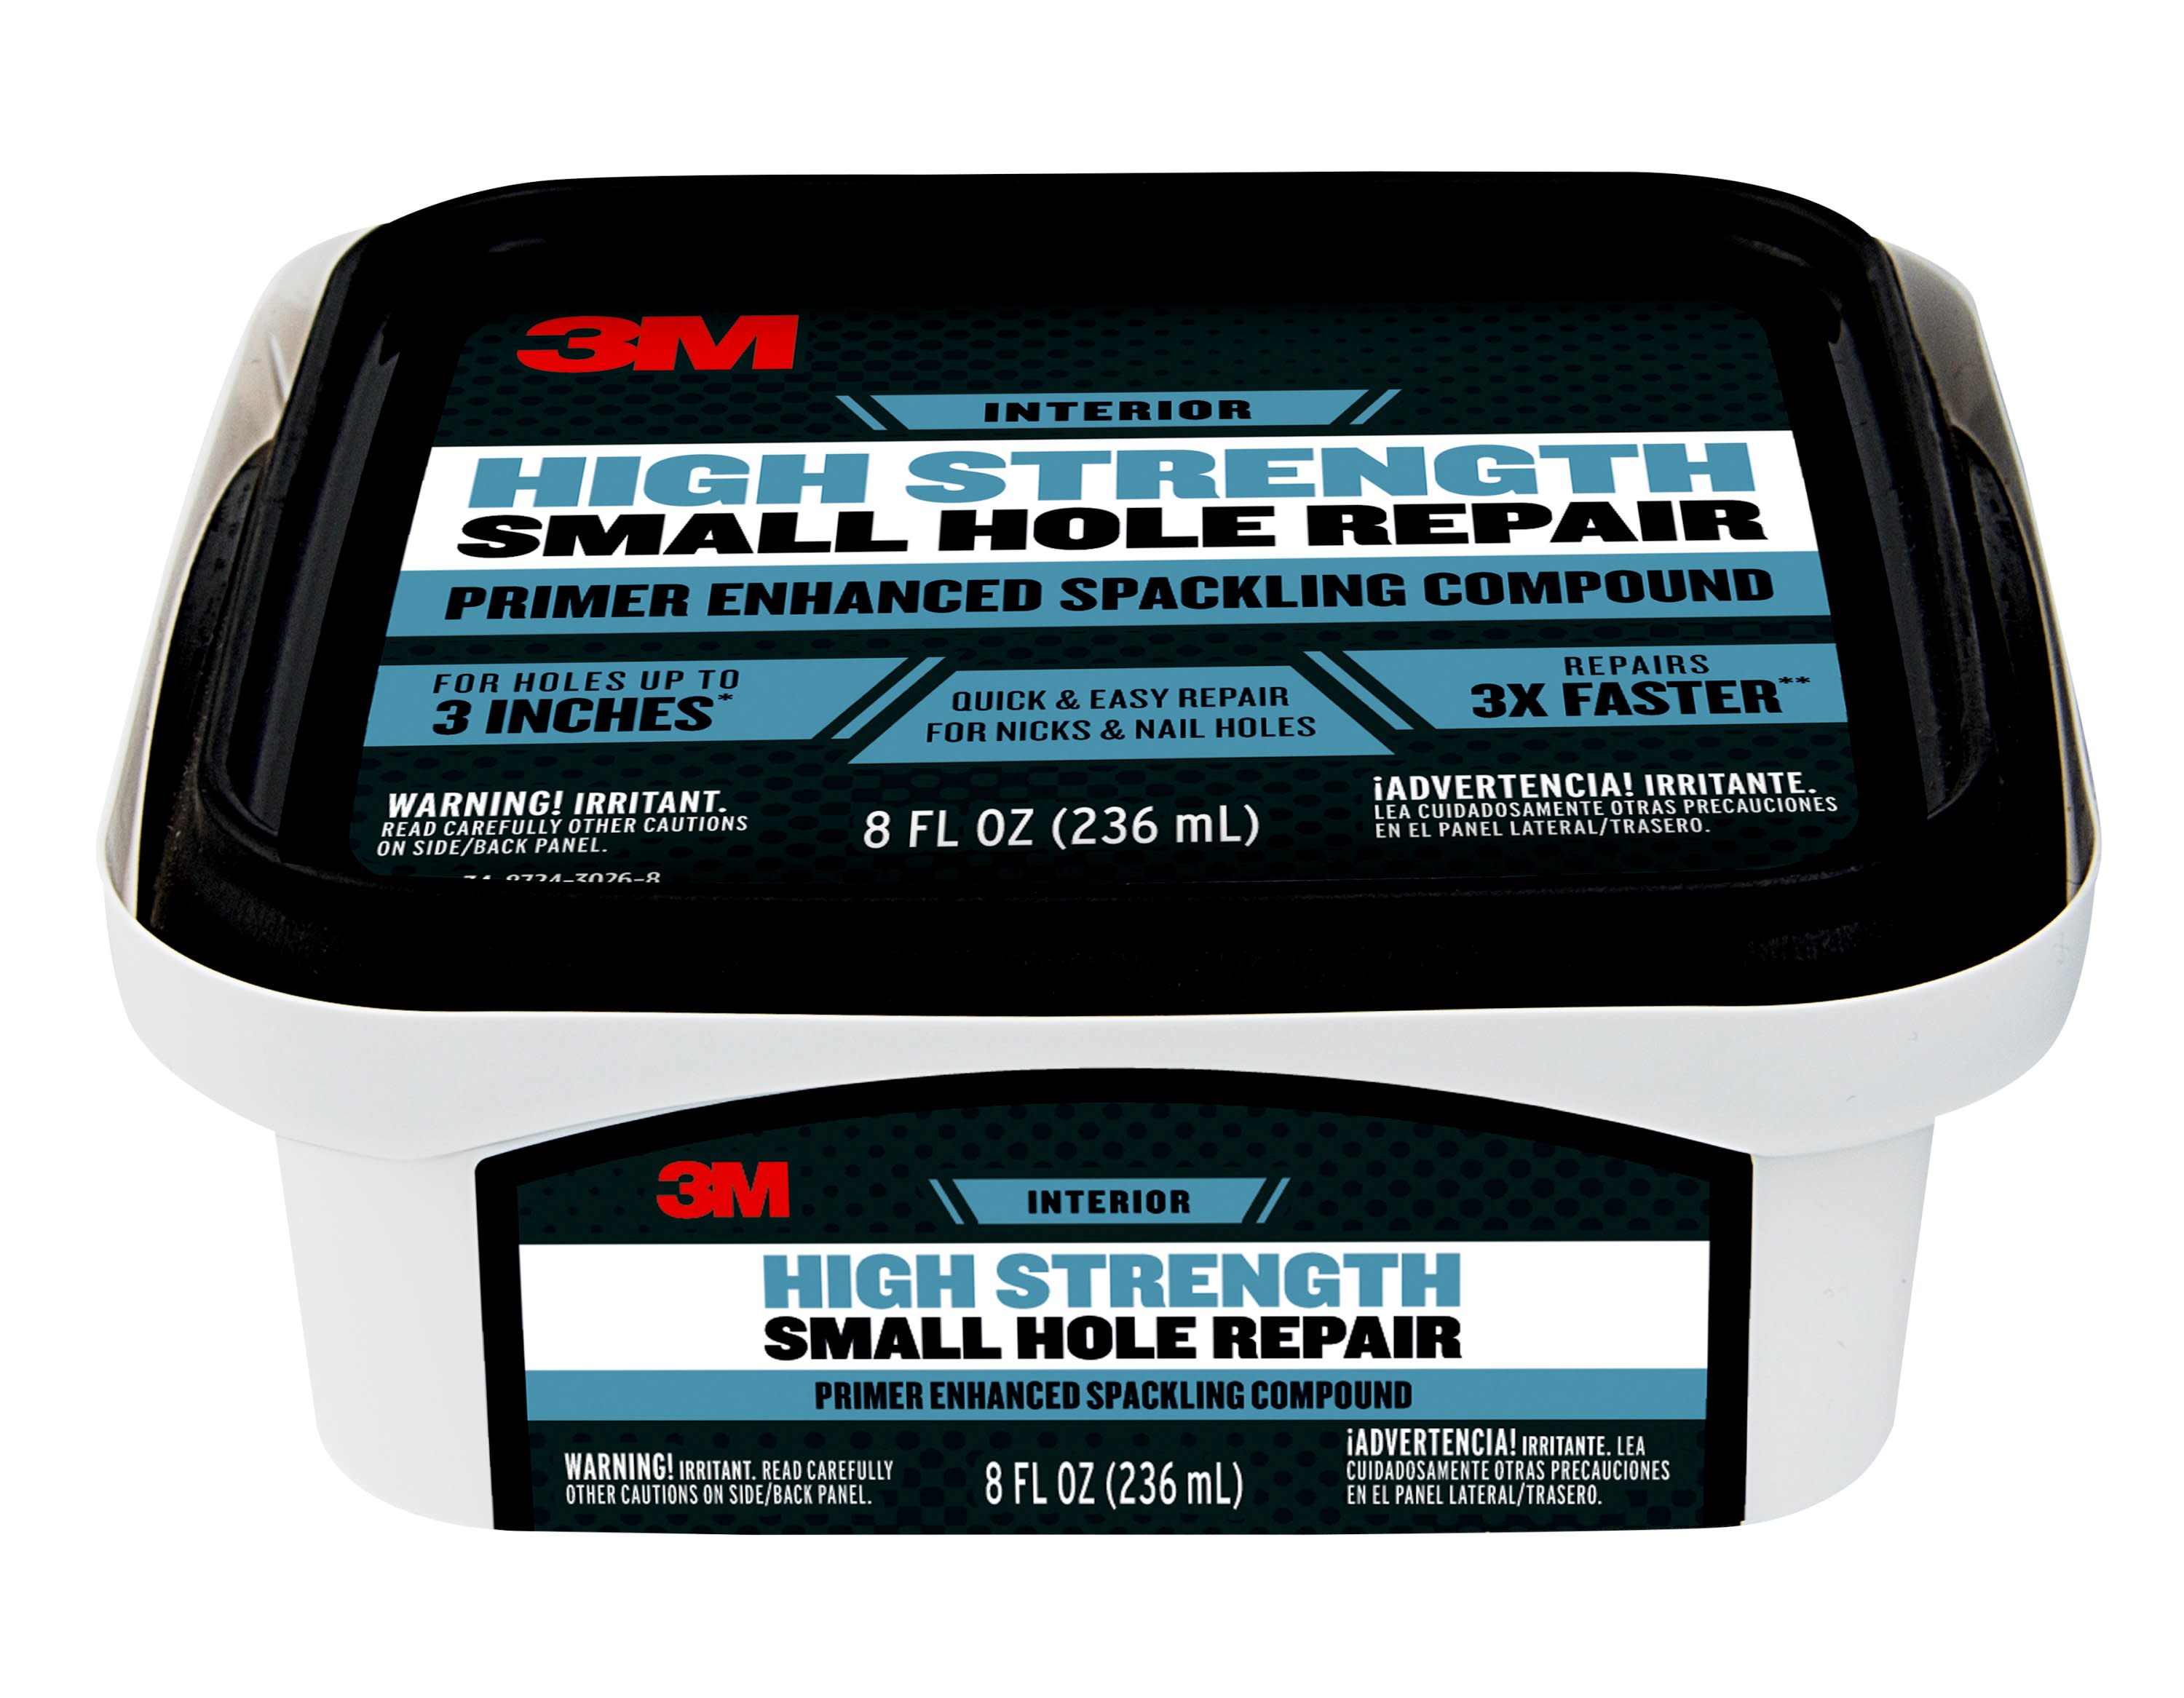 3M Large Hole Wall Repair Kit with 12 fl. oz Compound, Self-Adhesive Back  Plate, Putty Knife and Sanding Pad 